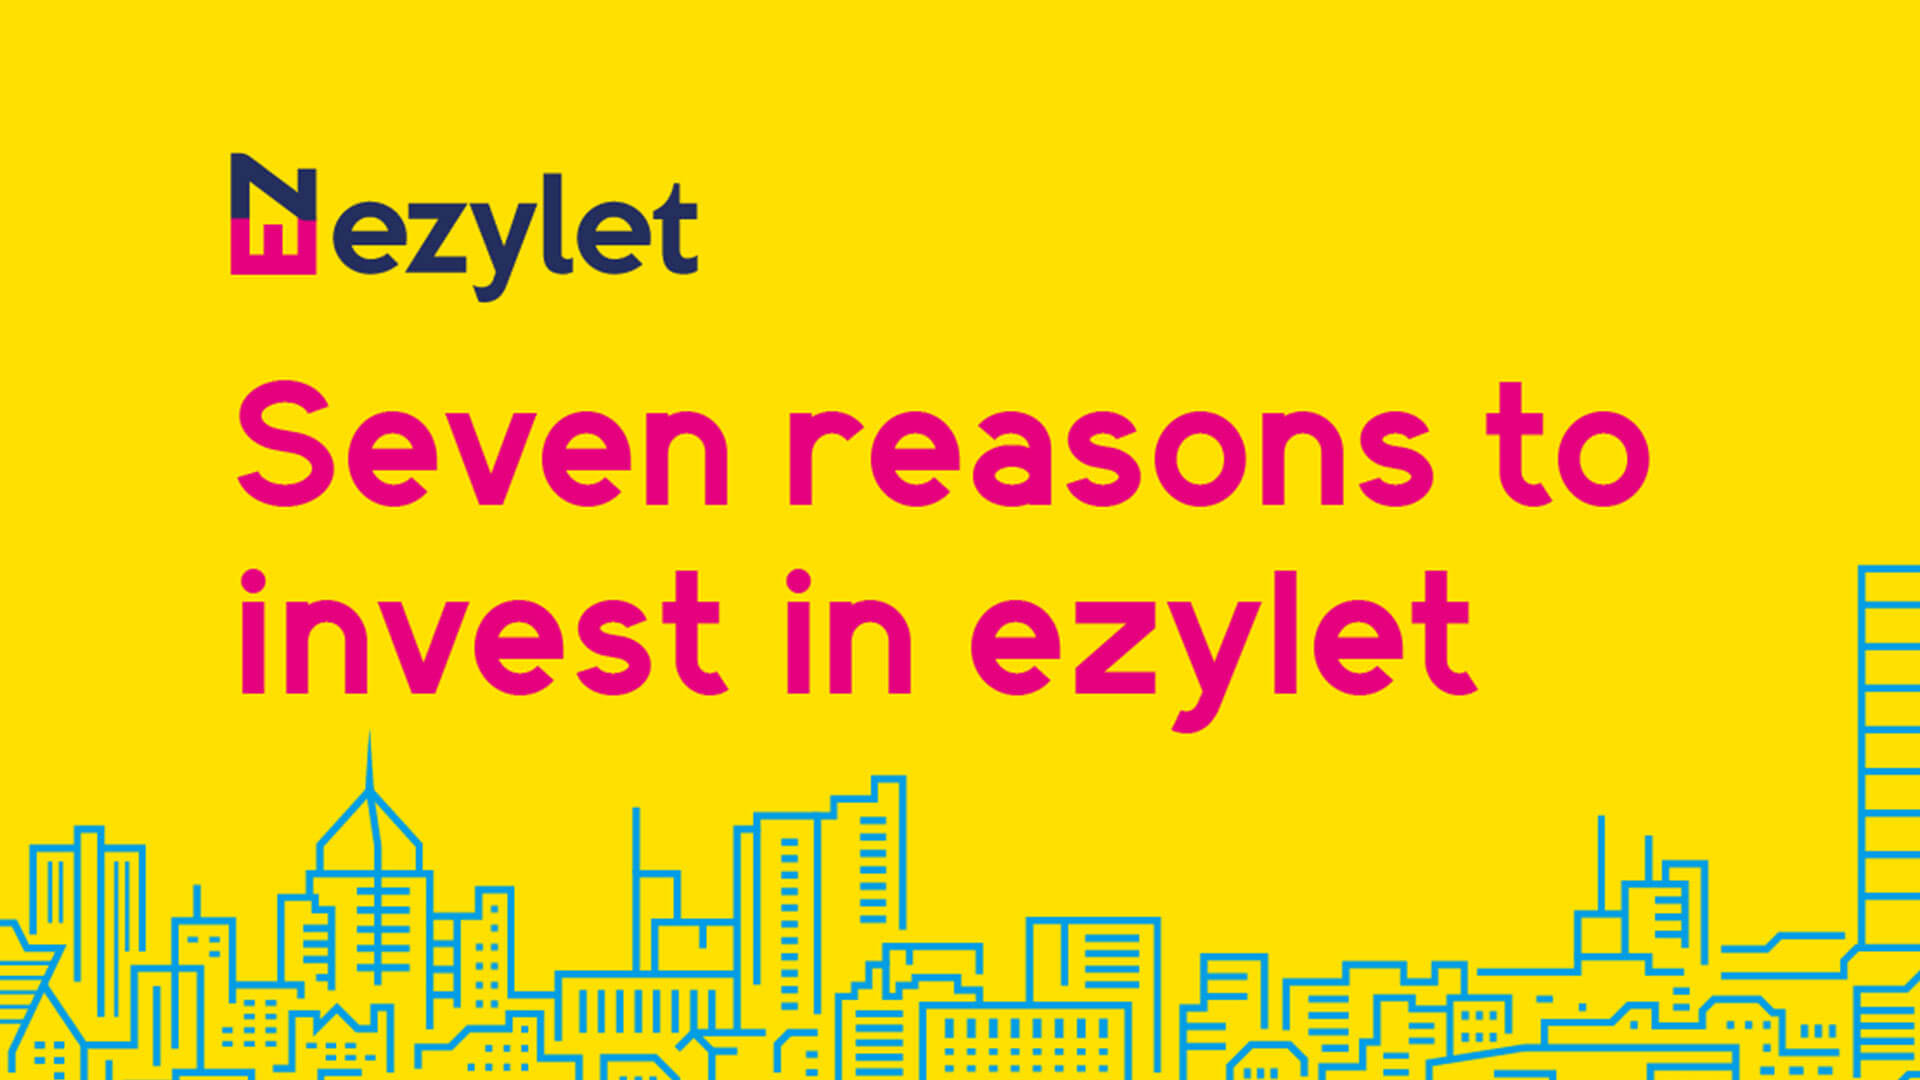 7 reasons to invest in Ezylet